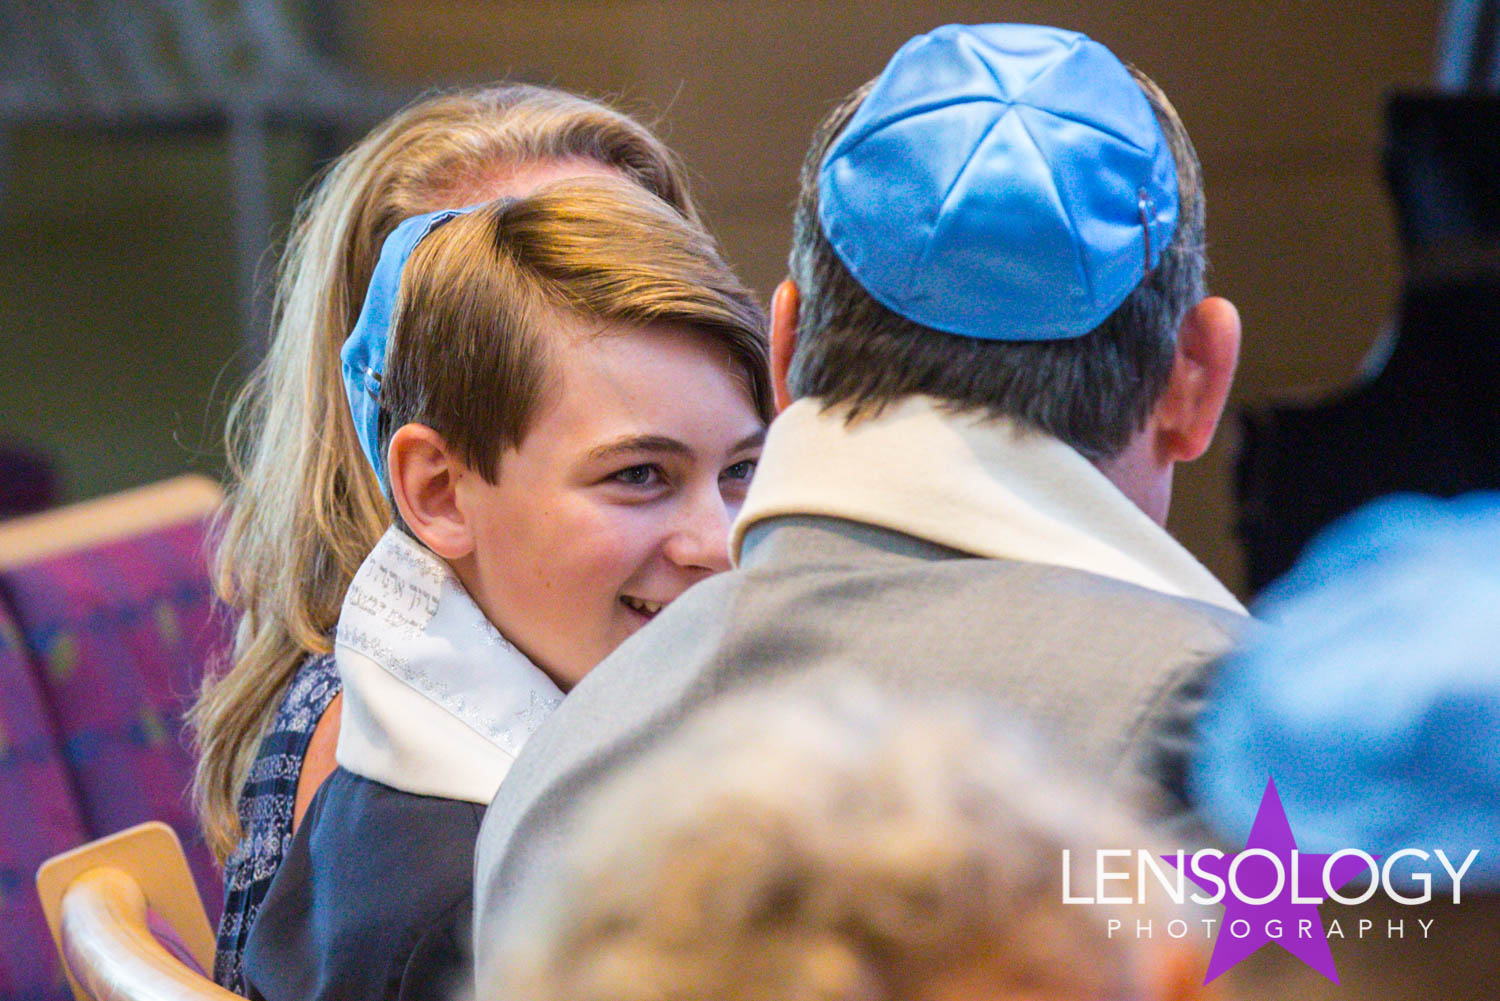 LENSOLOGY.NET - Riley G bar mitzvah ceremony, LA, CA.
All images are copyright of Lensology.net
Email: info@lensology.net
www.lensology.net